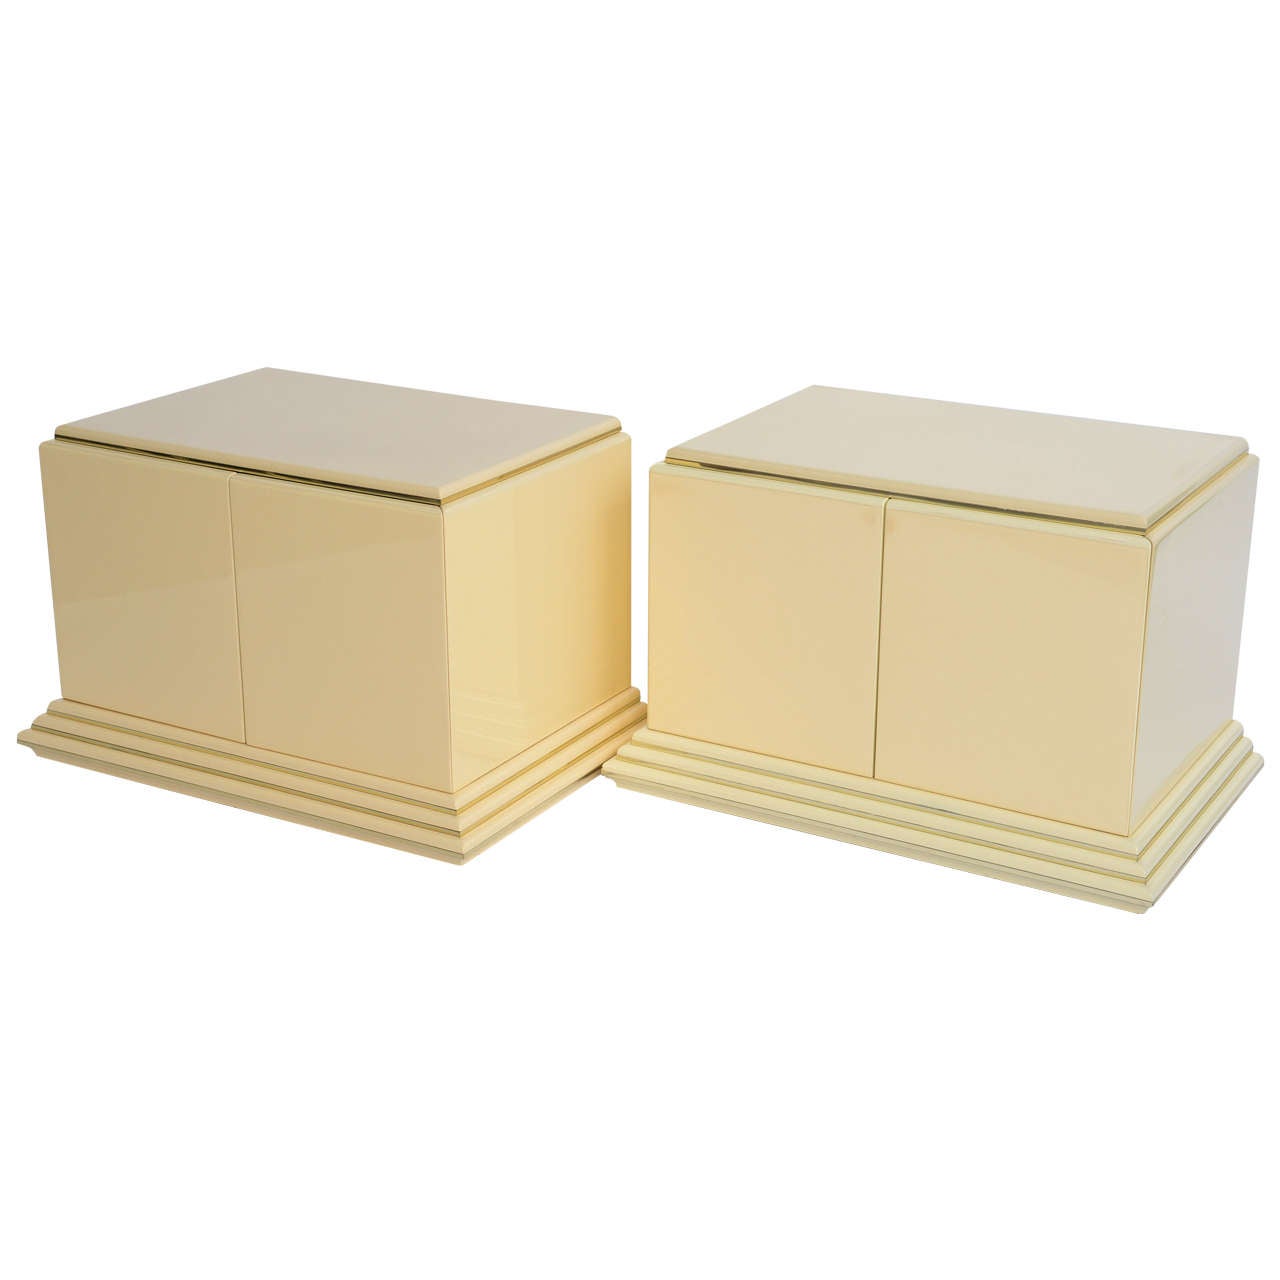 Pair of Rougier Streamline Moderne Style Cream Lacquer Bedside Tables